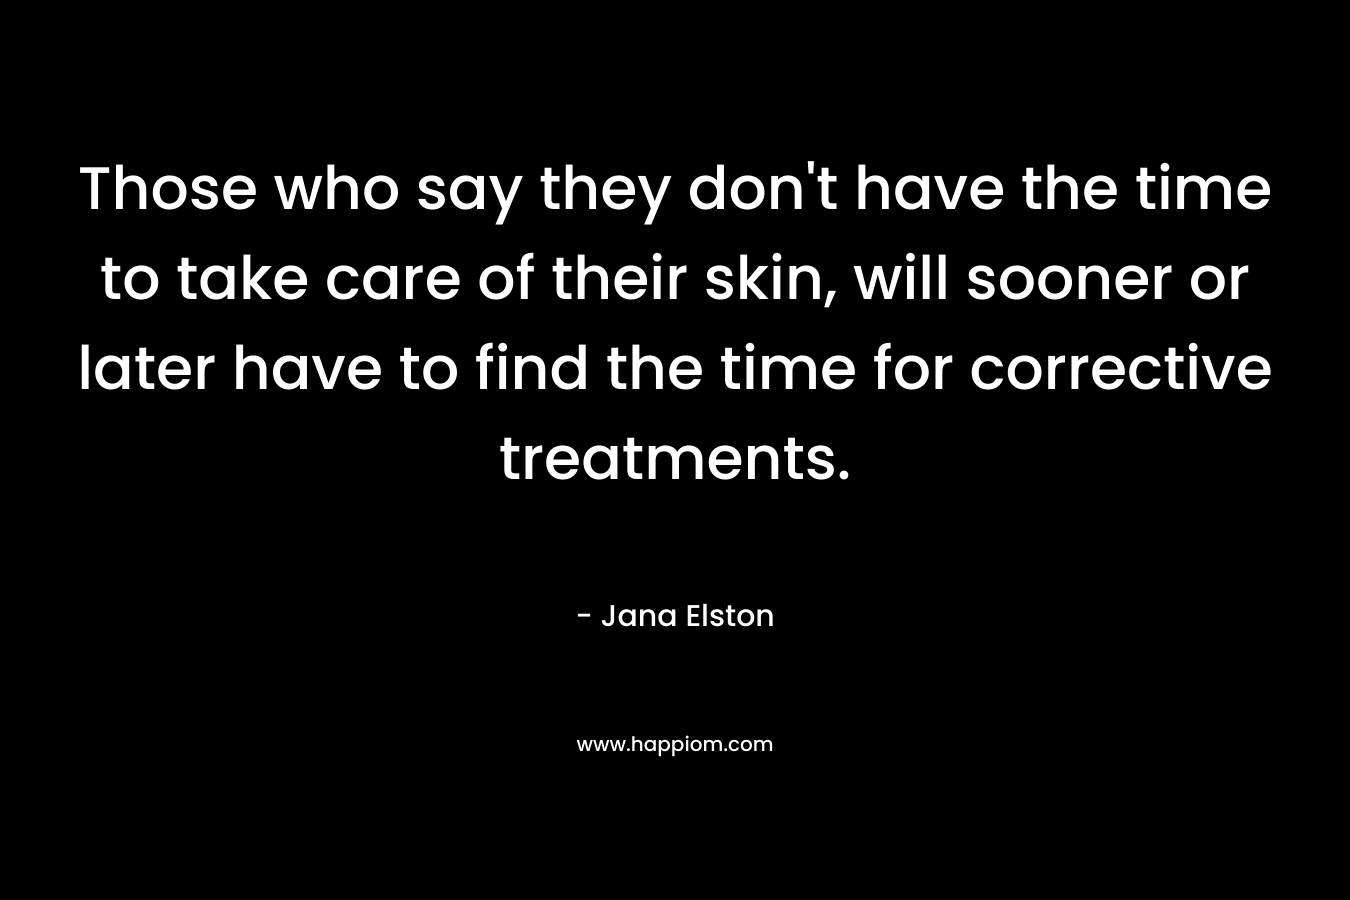 Those who say they don't have the time to take care of their skin, will sooner or later have to find the time for corrective treatments.